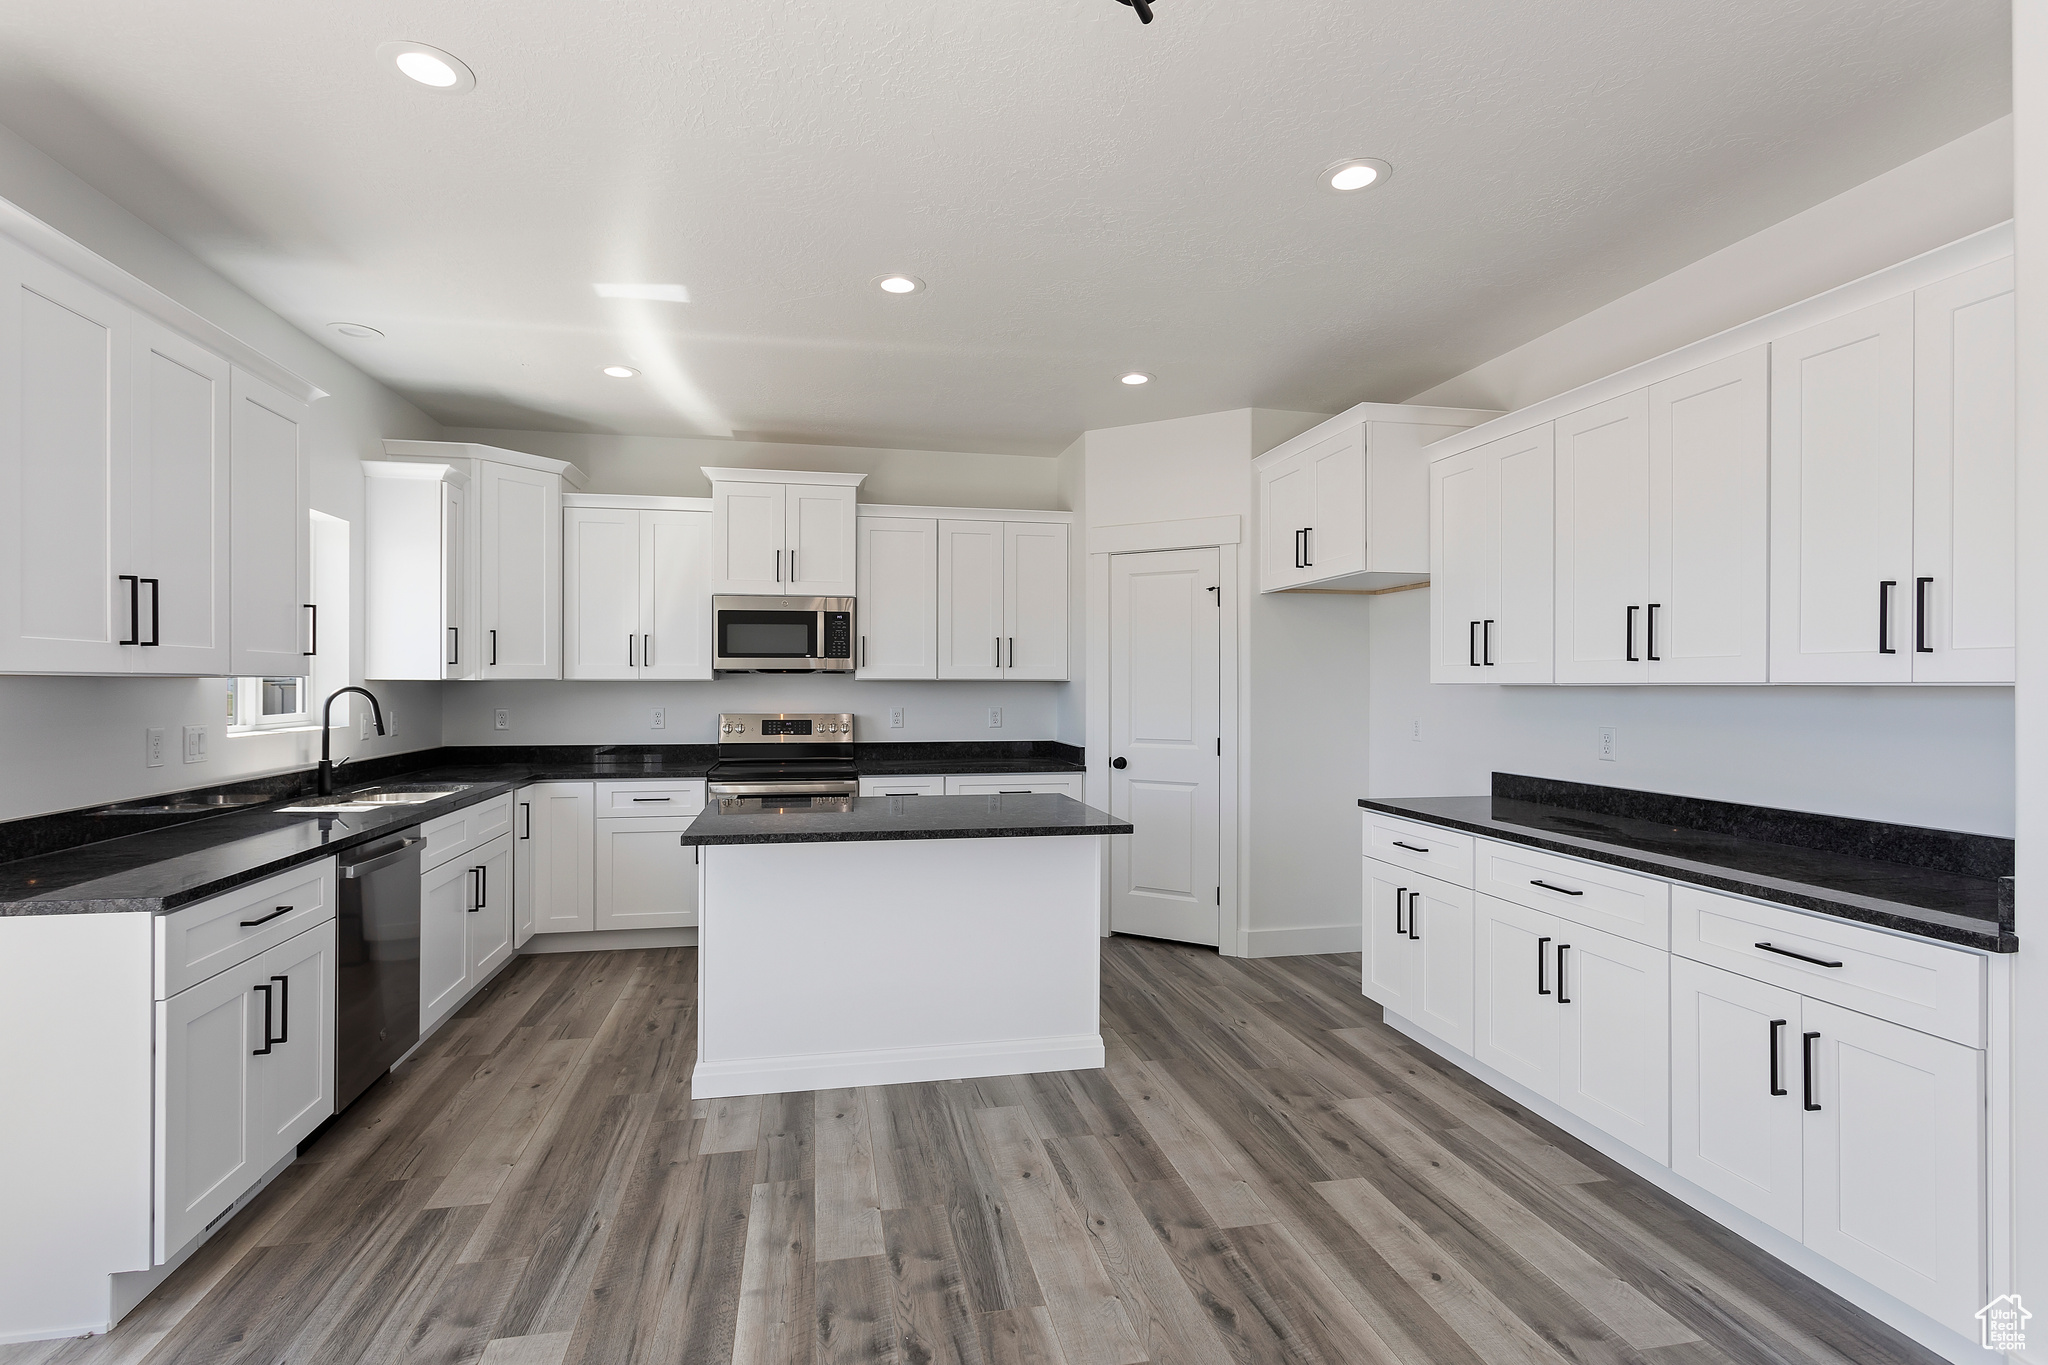 Kitchen featuring appliances with stainless steel finishes, a center island, sink, white cabinetry, and wood-type flooring